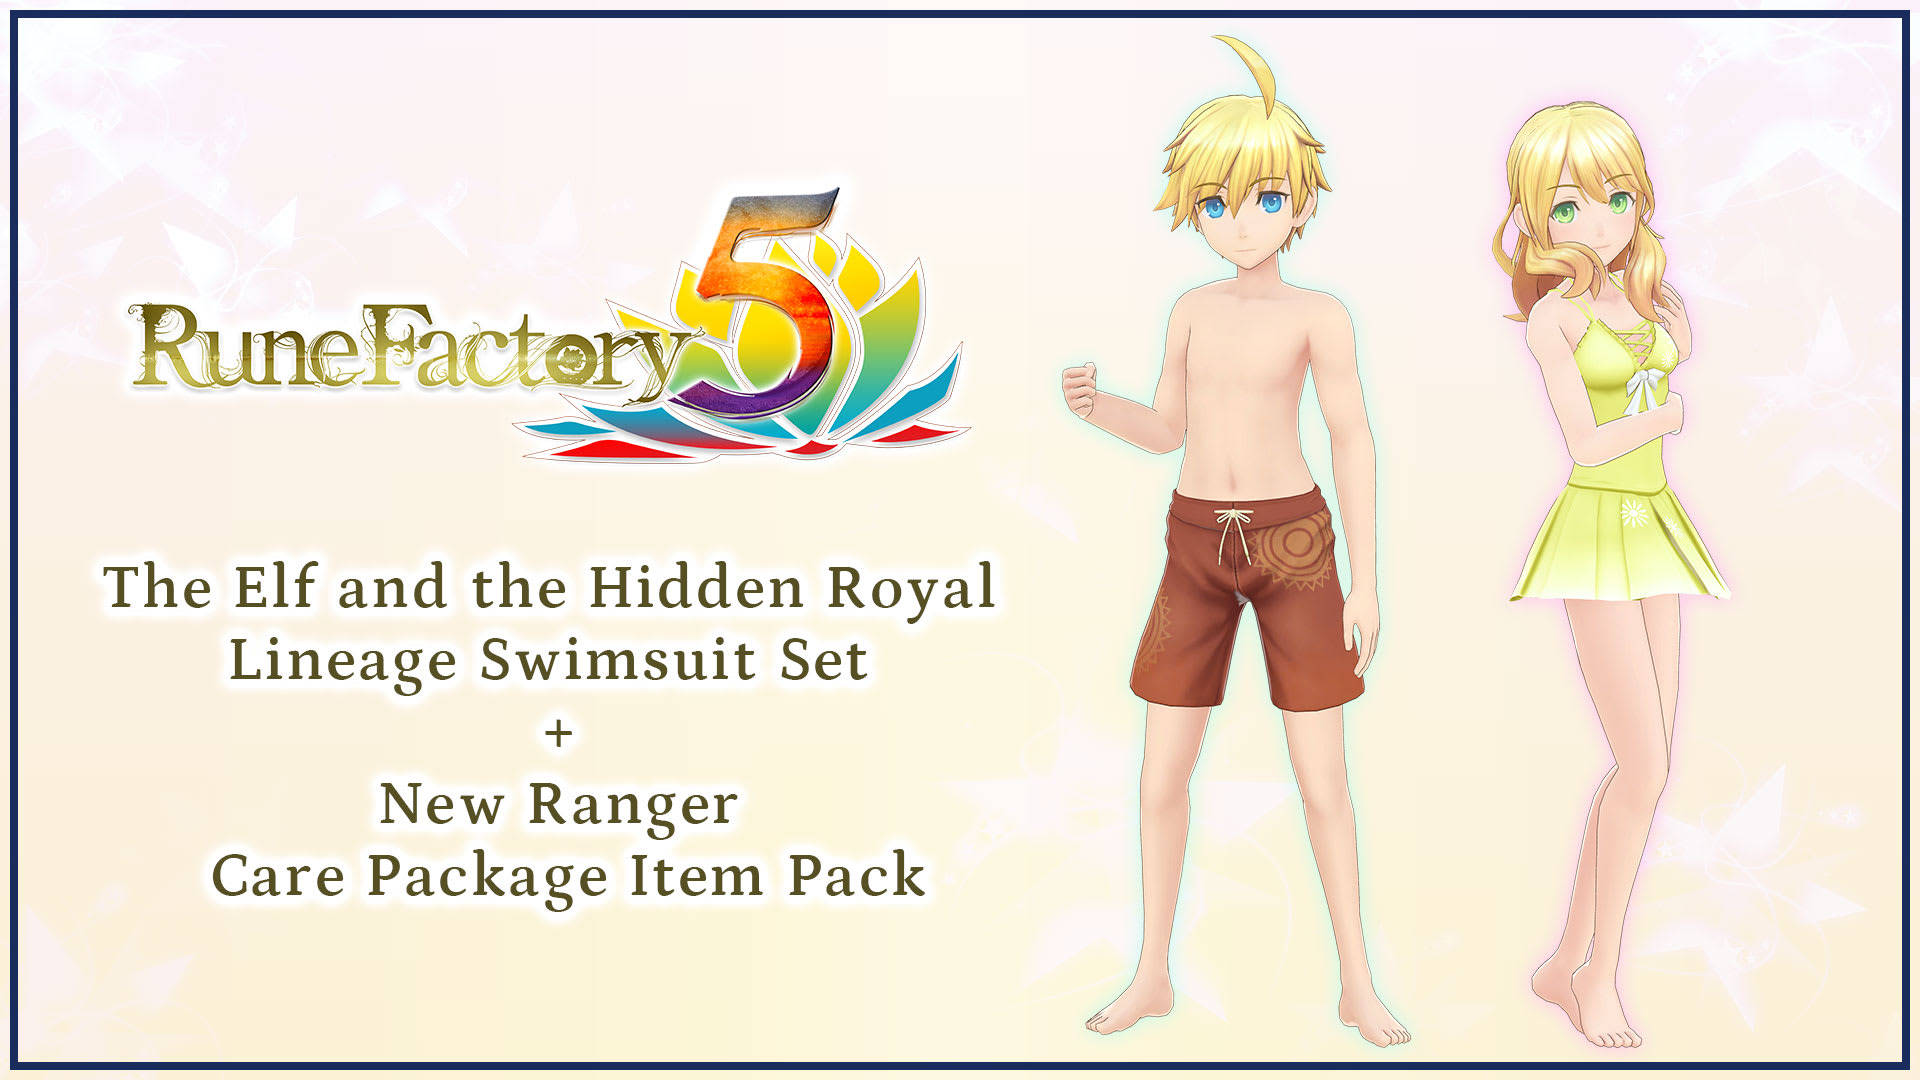 The Elf and the Hidden Royal Lineage Swimsuit Set + New Ranger Care Package Item Pack